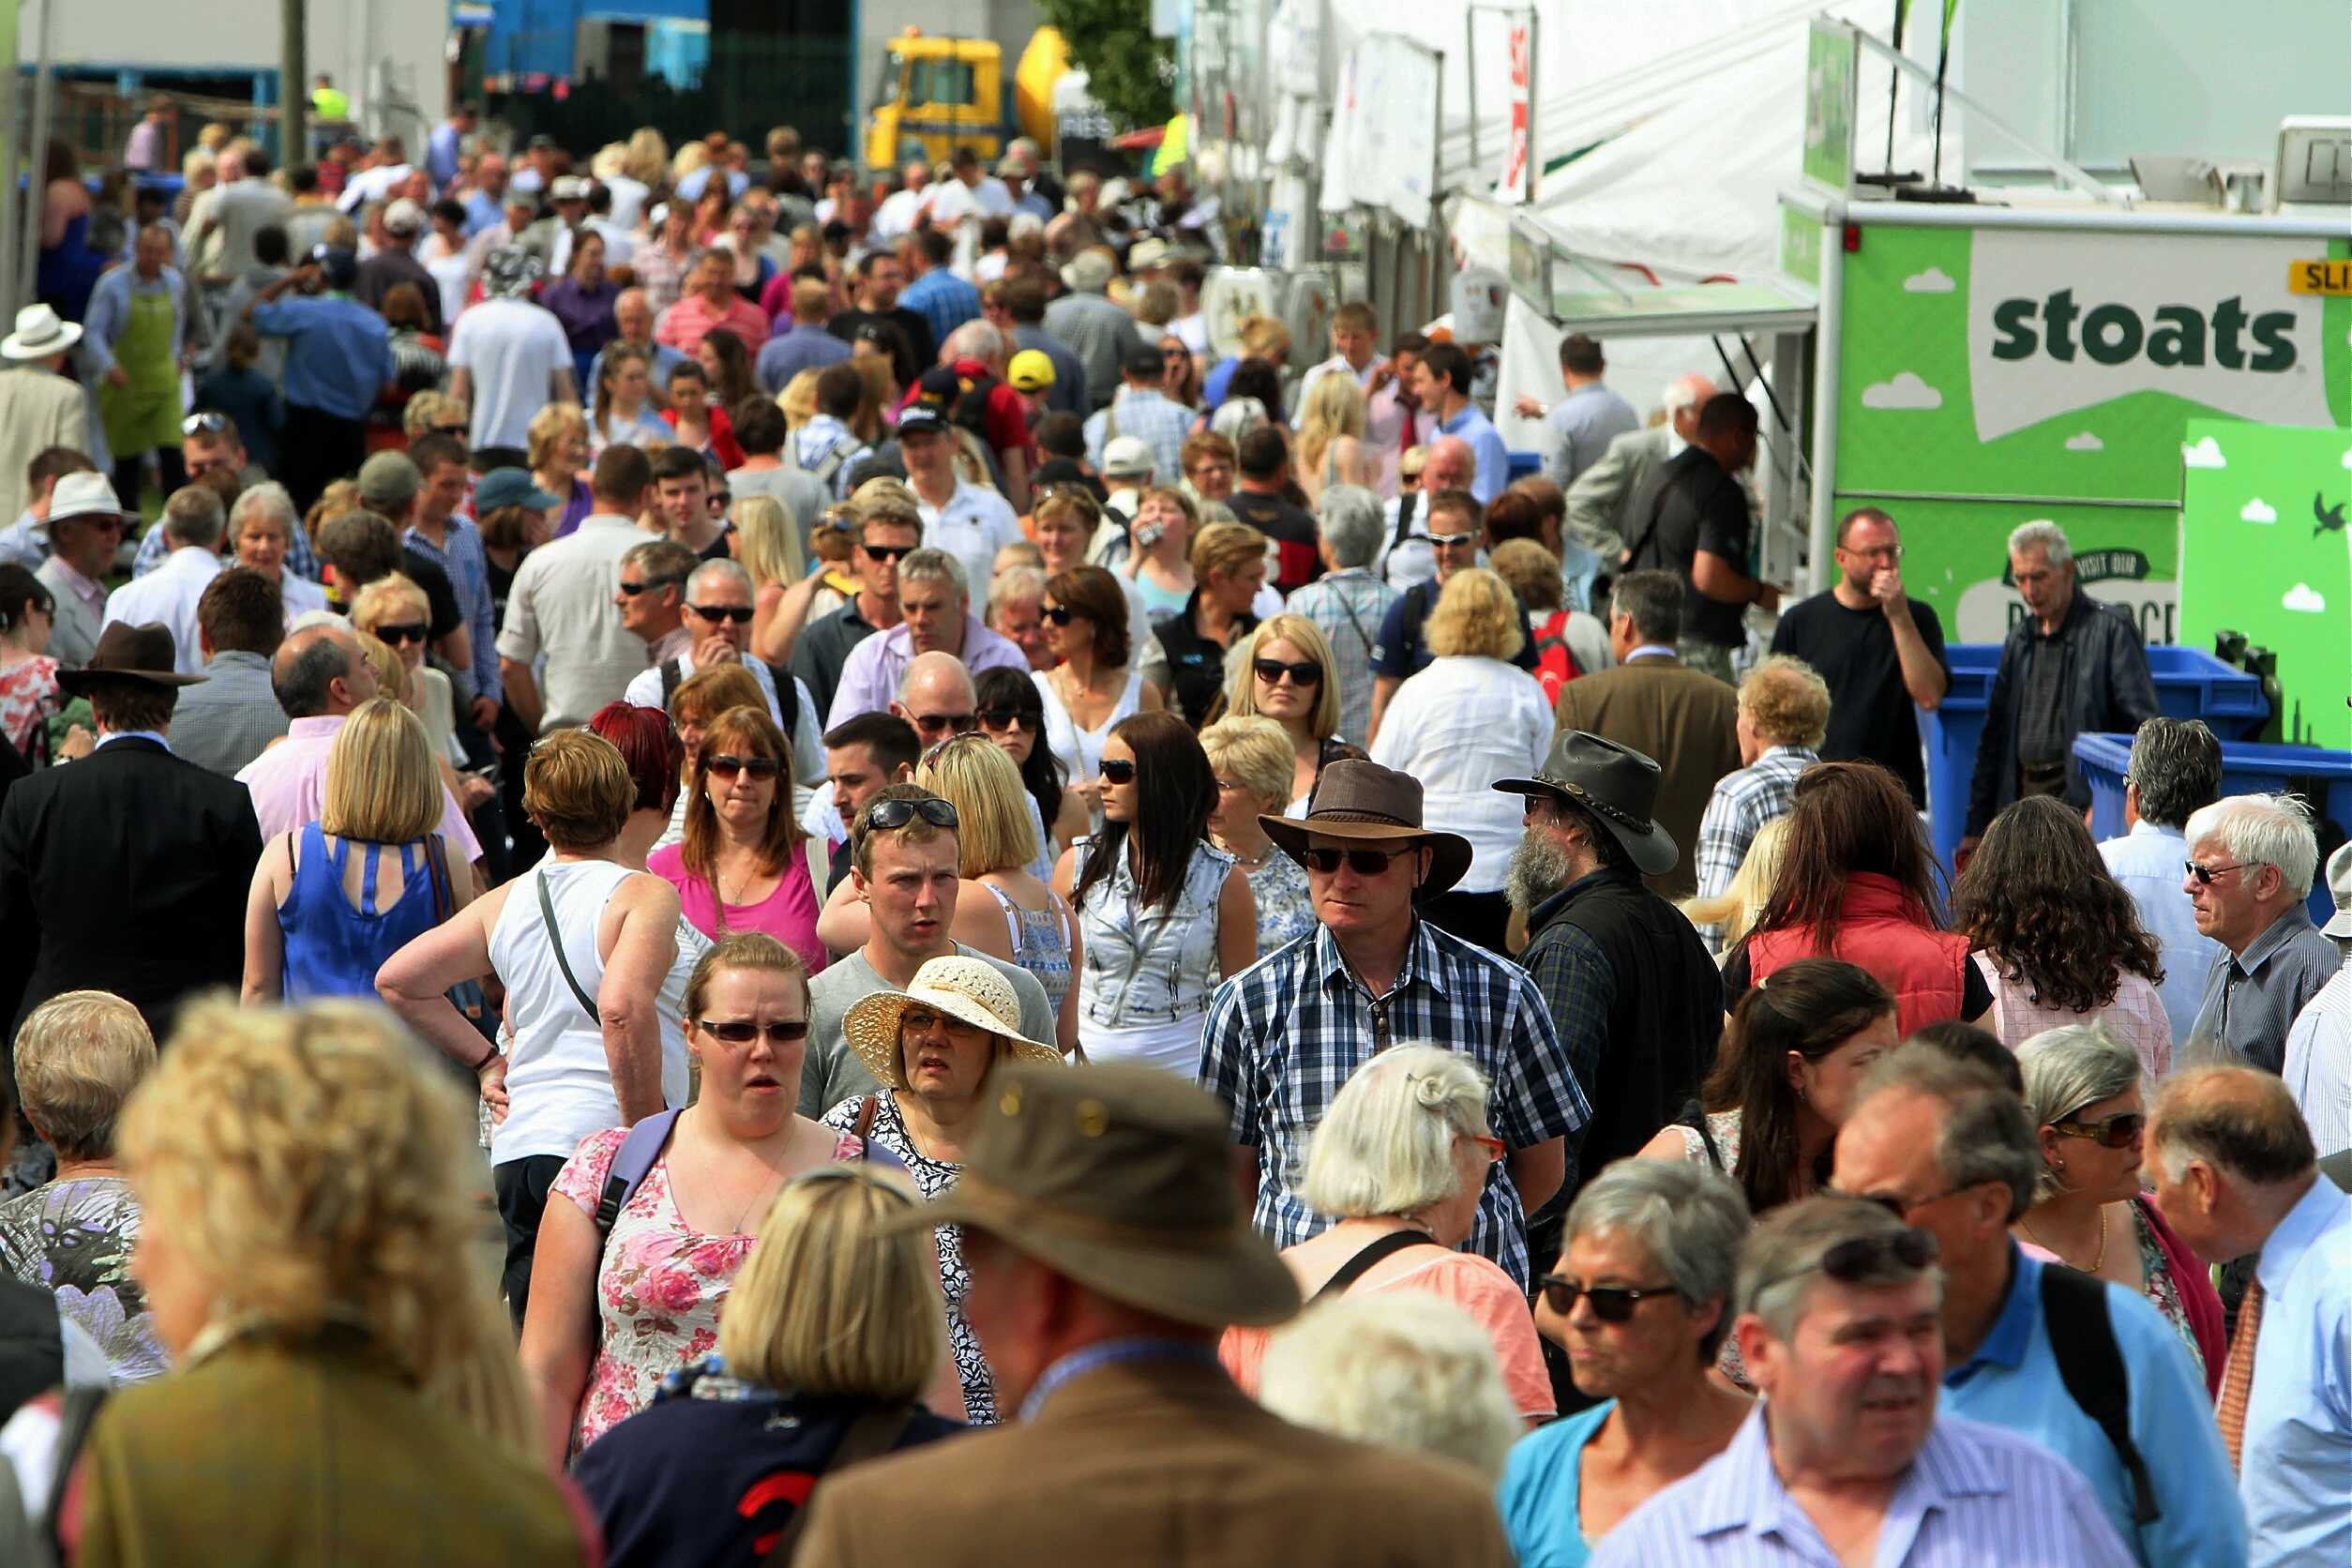 Keeping visitors safe is a priority for the Highland Show organisers